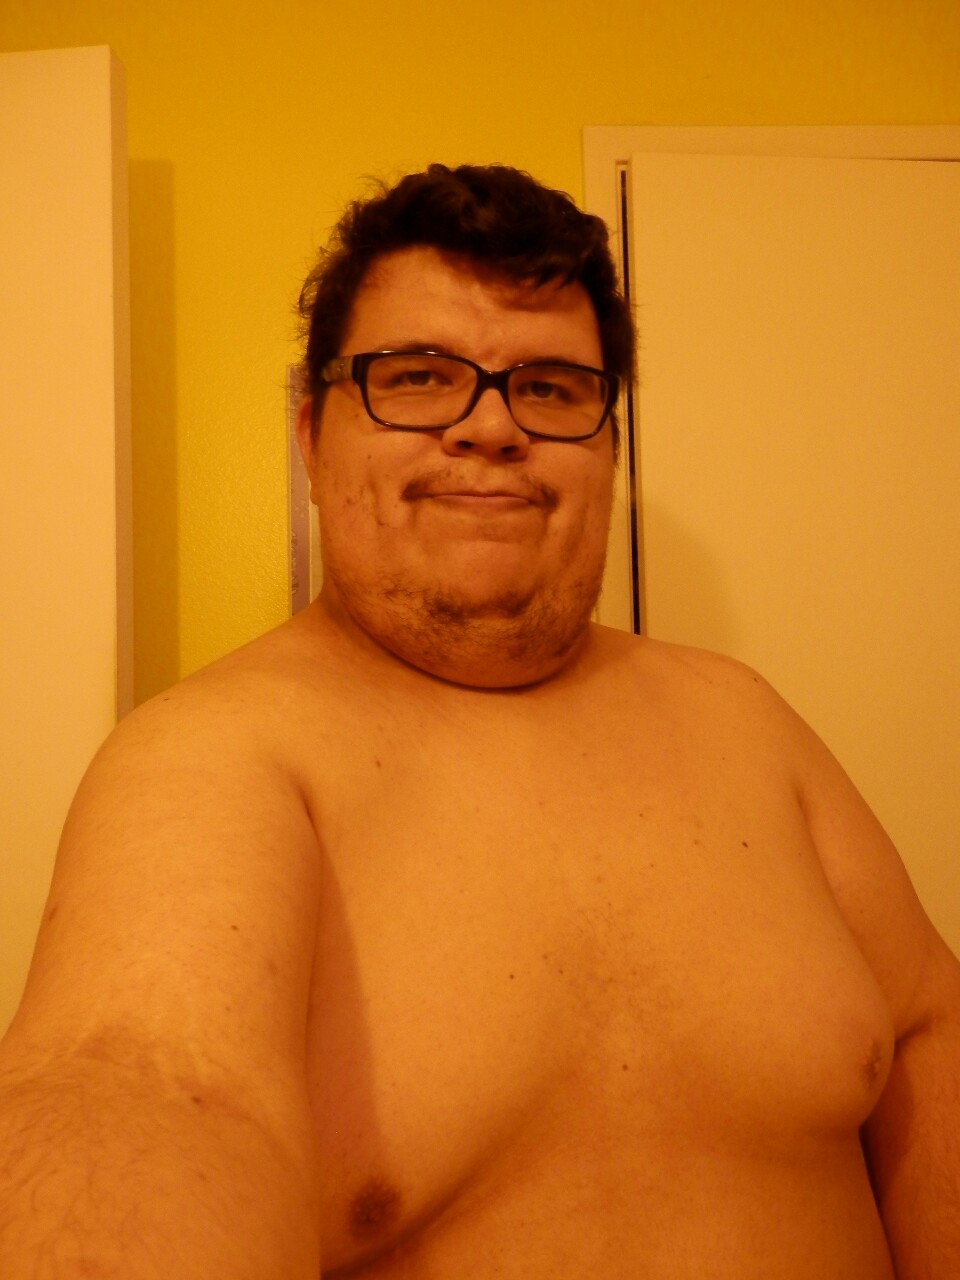 i-lust-you-chubs:  submission!!! sweet guy named Nick, vers, chubby, in California.